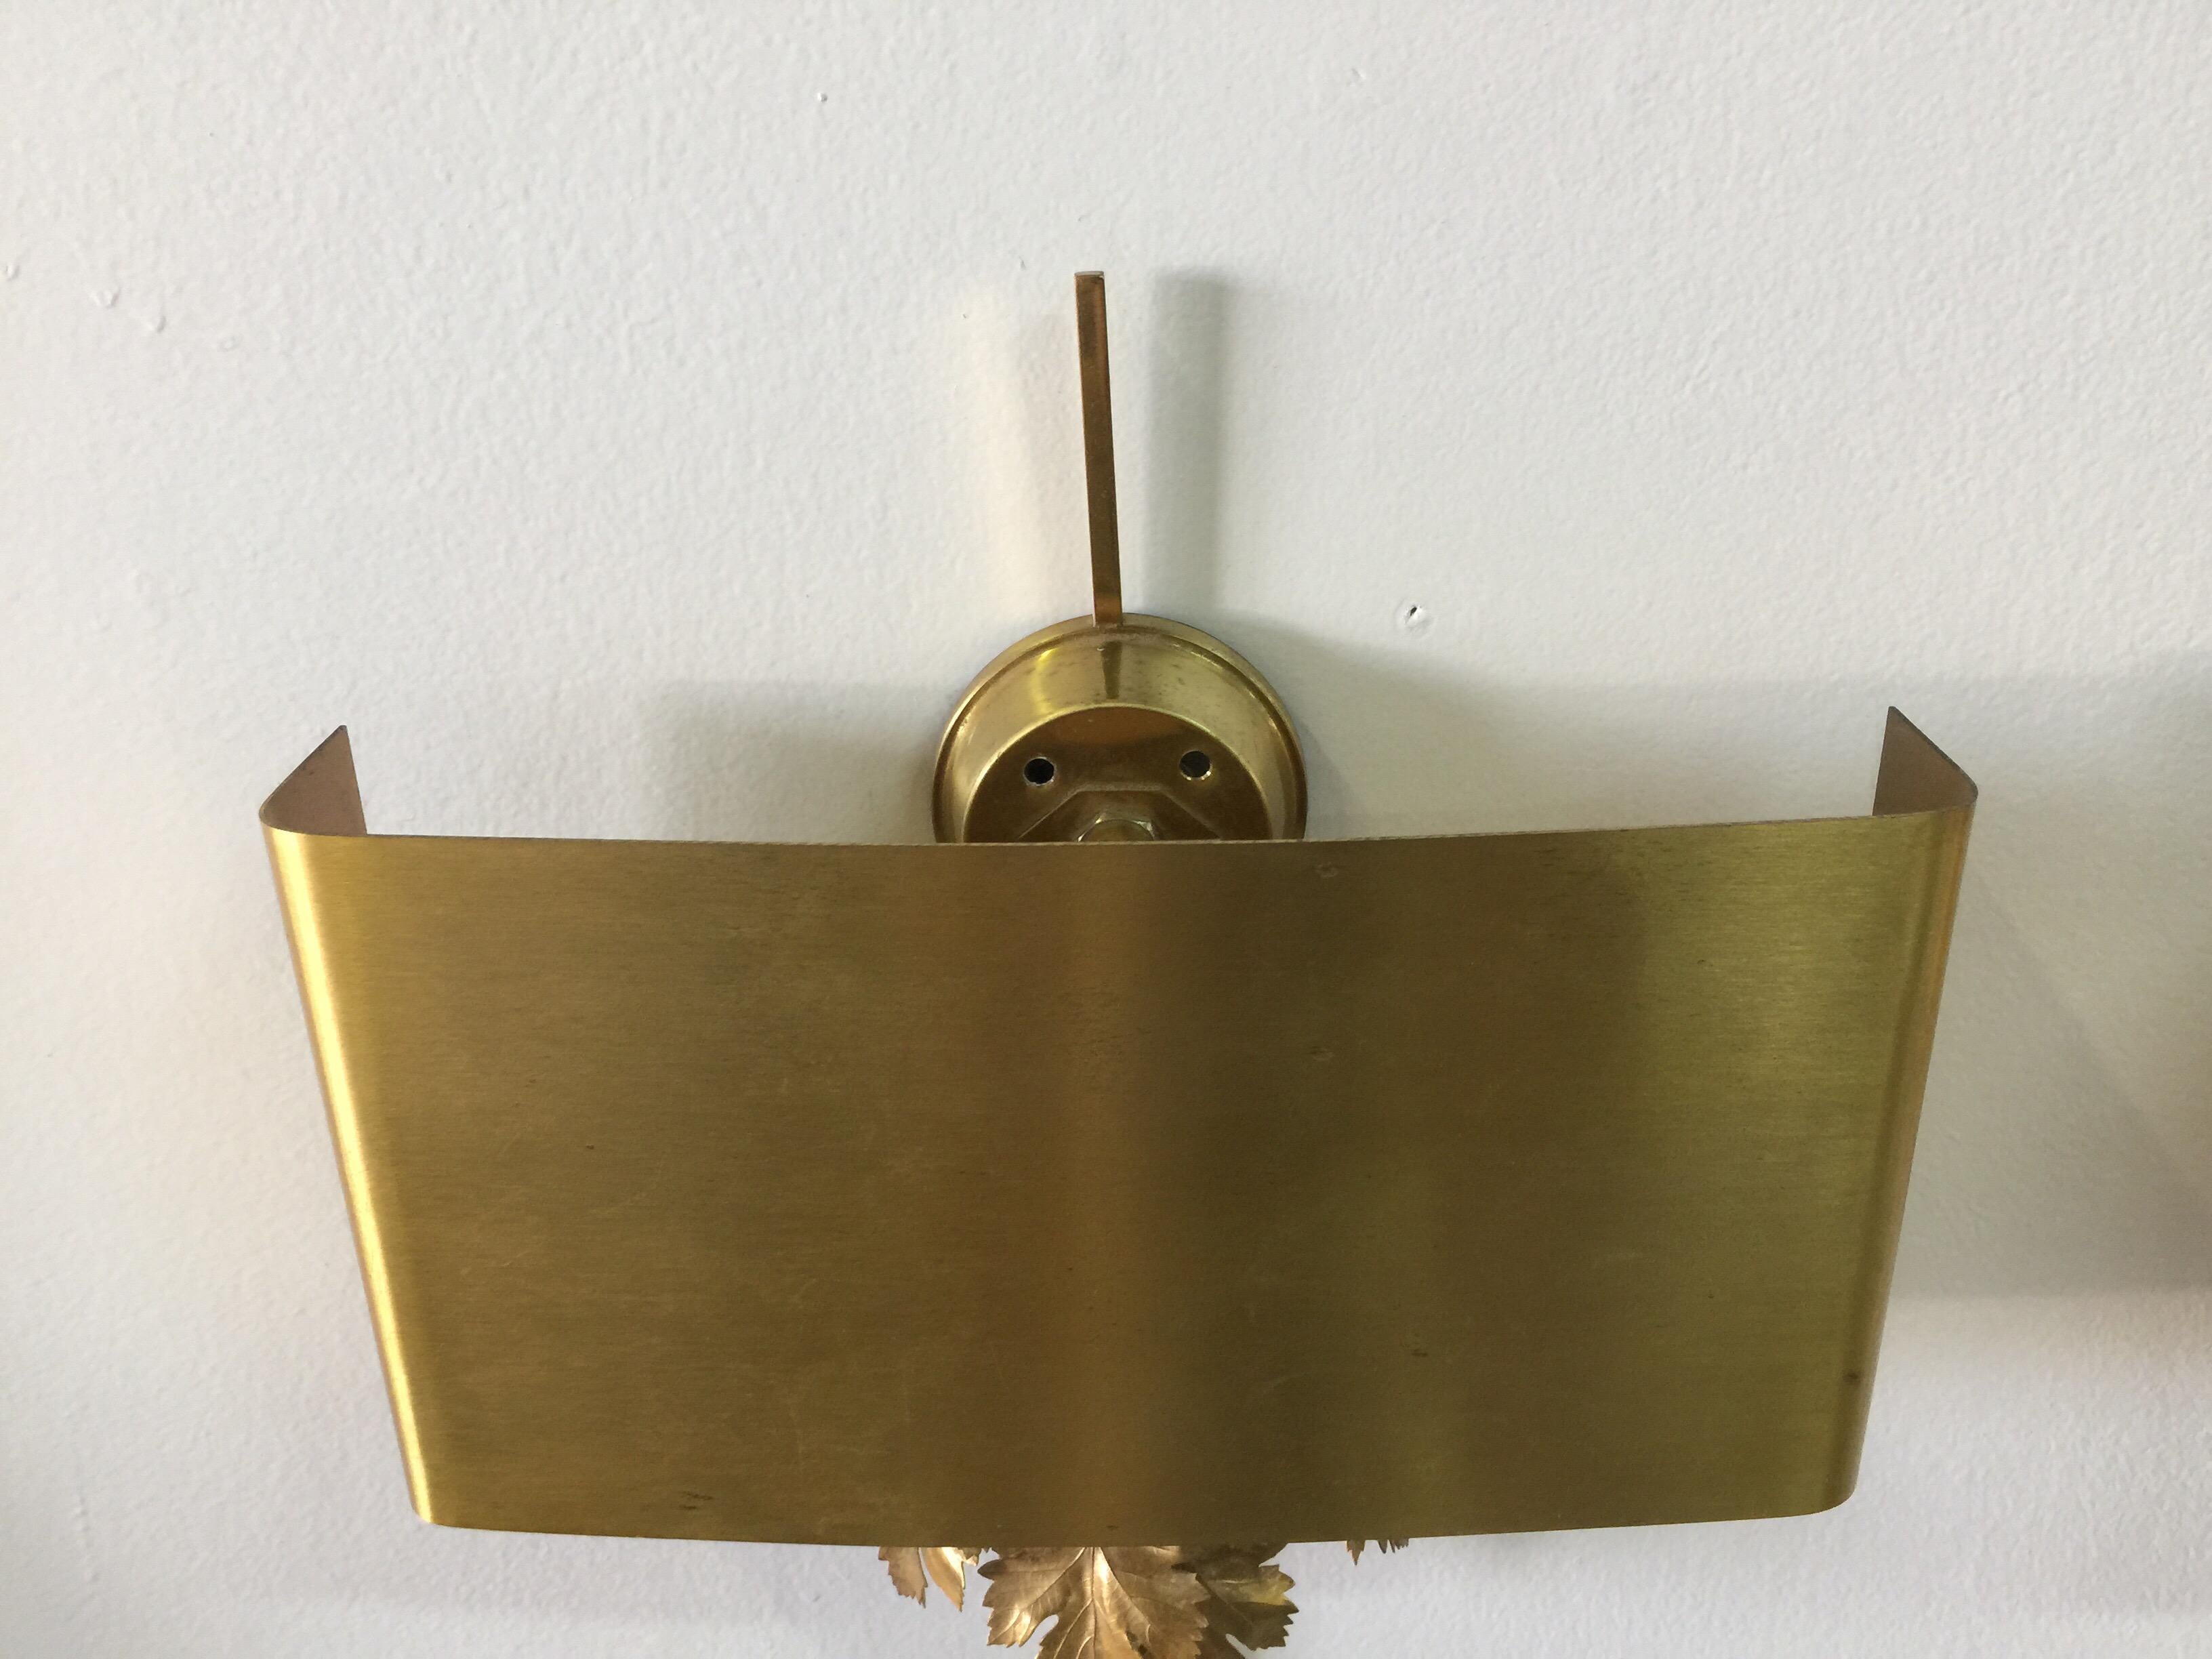 A very beautiful pair of all brass wall sconces by Maison Charles. All original shade, leaves, etc. Very nice scale and original wiring.